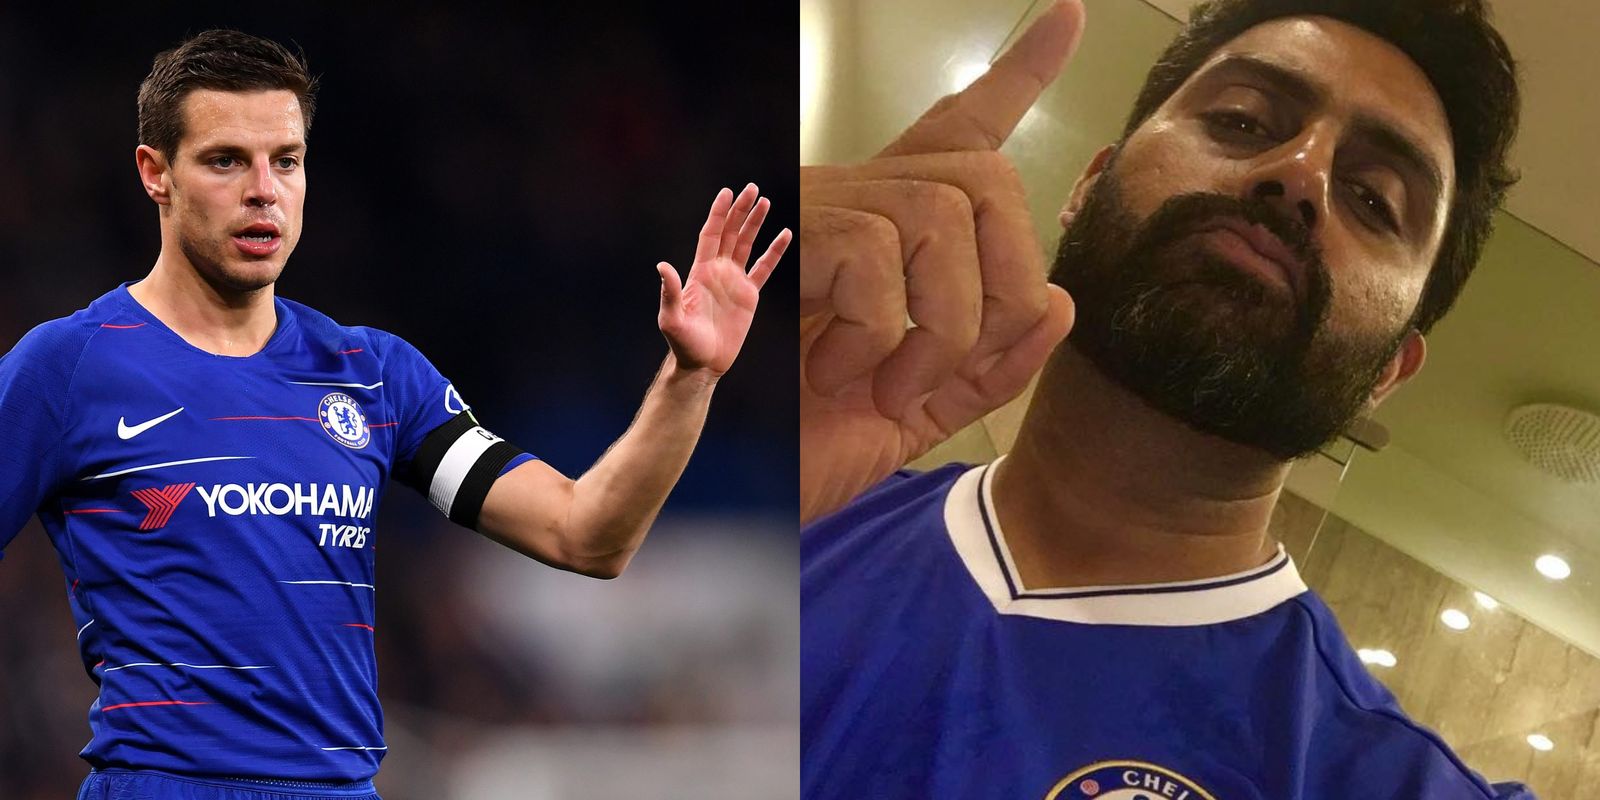 Down With COVID-19 Abhishek Bachchan Receives A Note From Chelsea Captain Cesar Azpilicueta, Says 'This Made My Week'